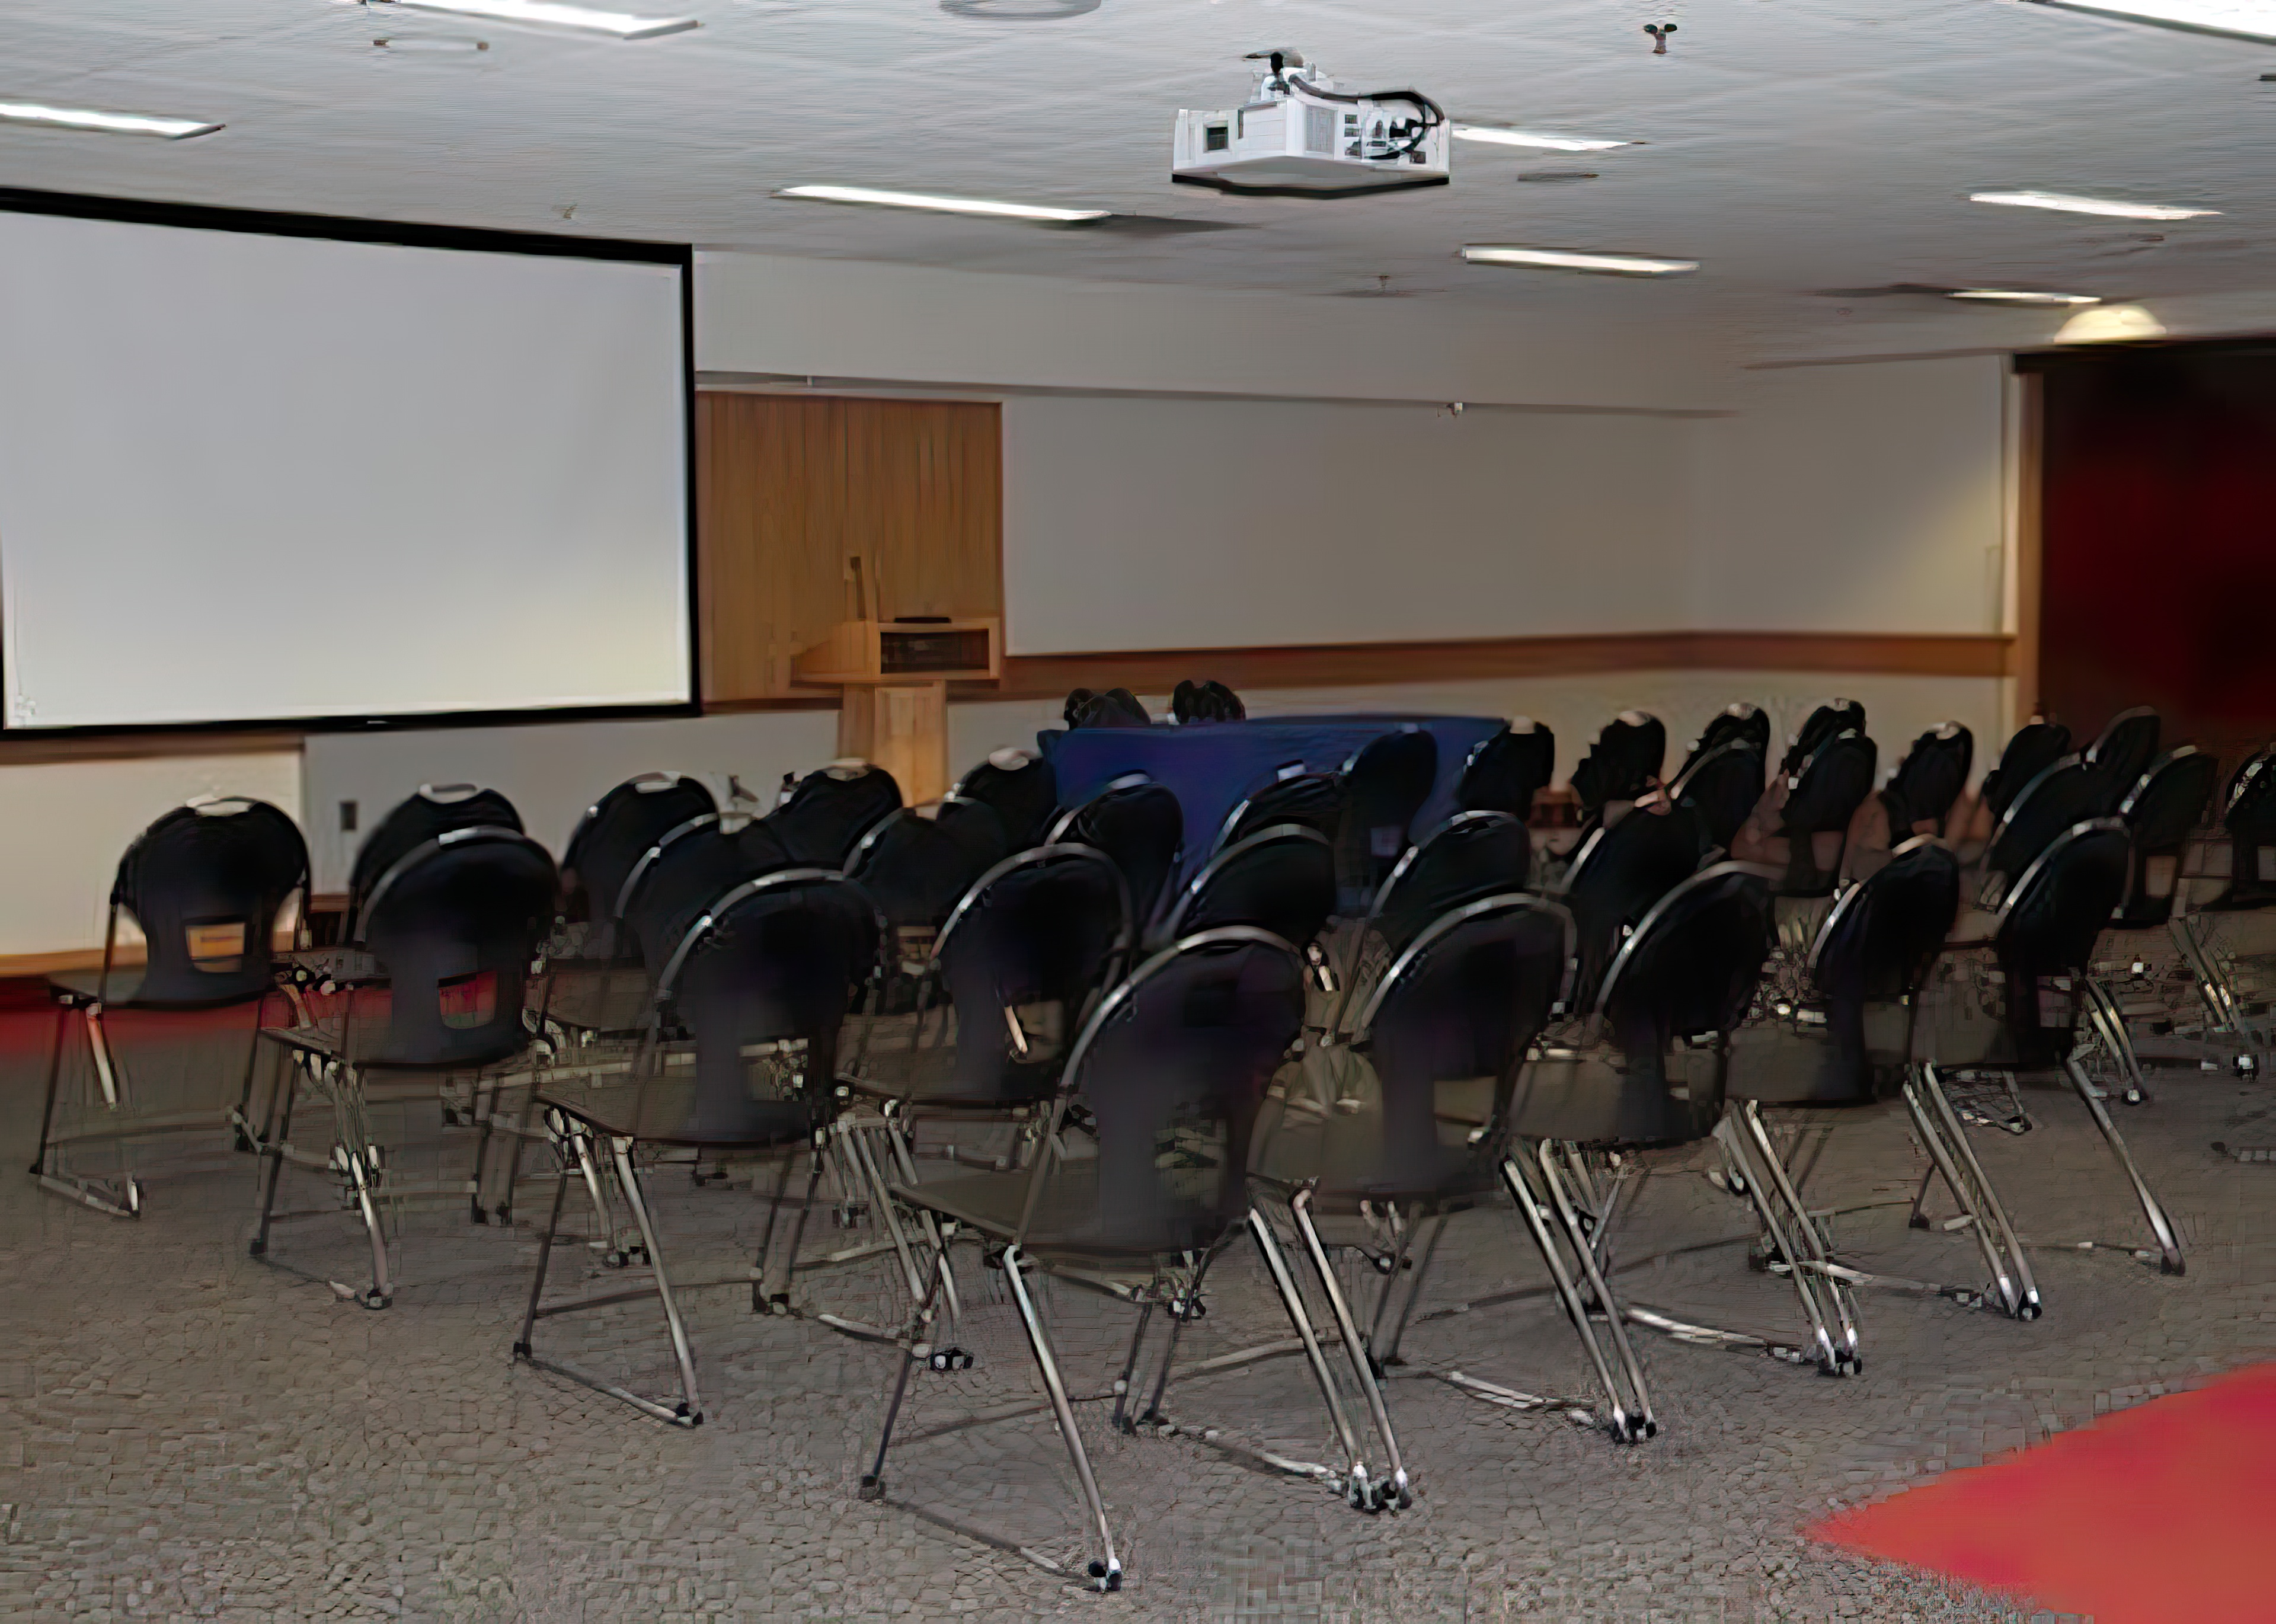 Rows of chairs face a speakers podium. A view screen has been pulled down in the background.